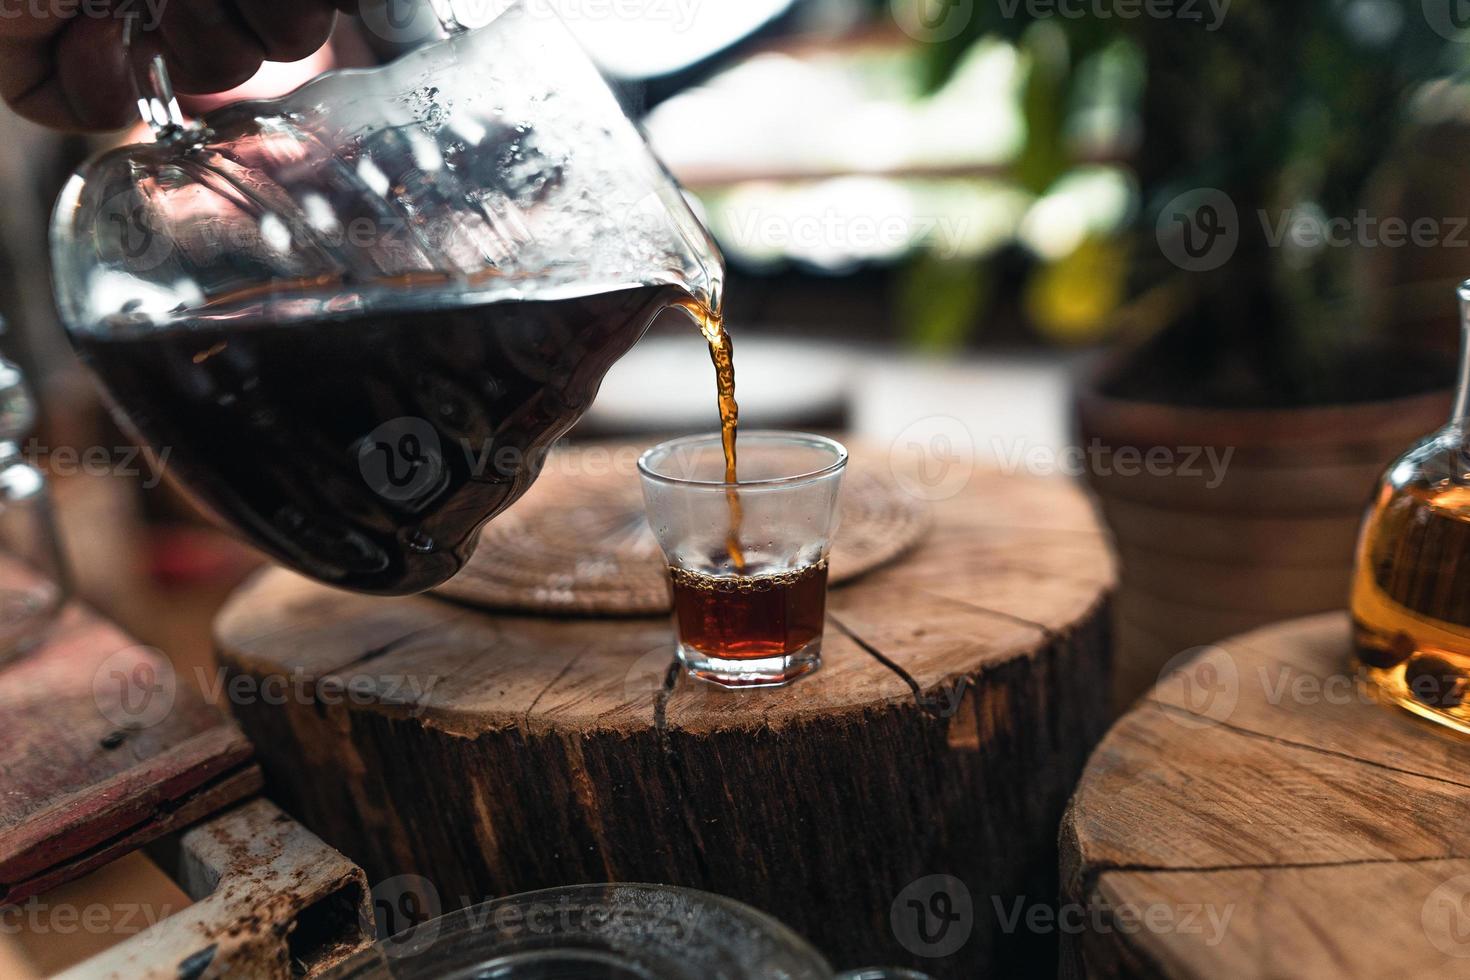 Pouring a hot water over a drip coffee photo